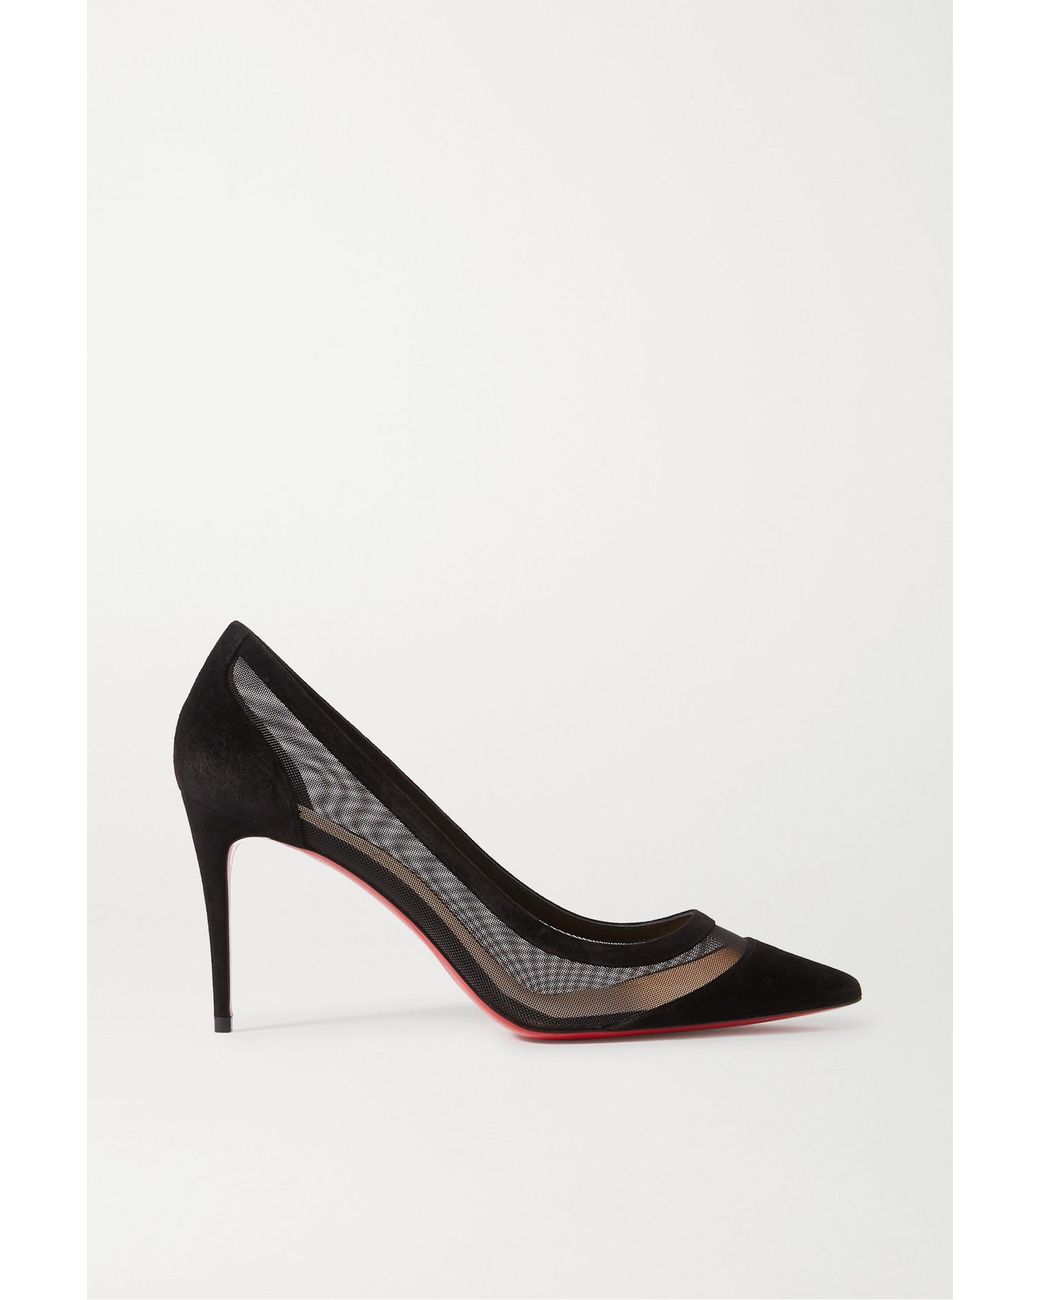 Christian Louboutin Galativi 85 Suede And Mesh Pumps in Black | Lyst